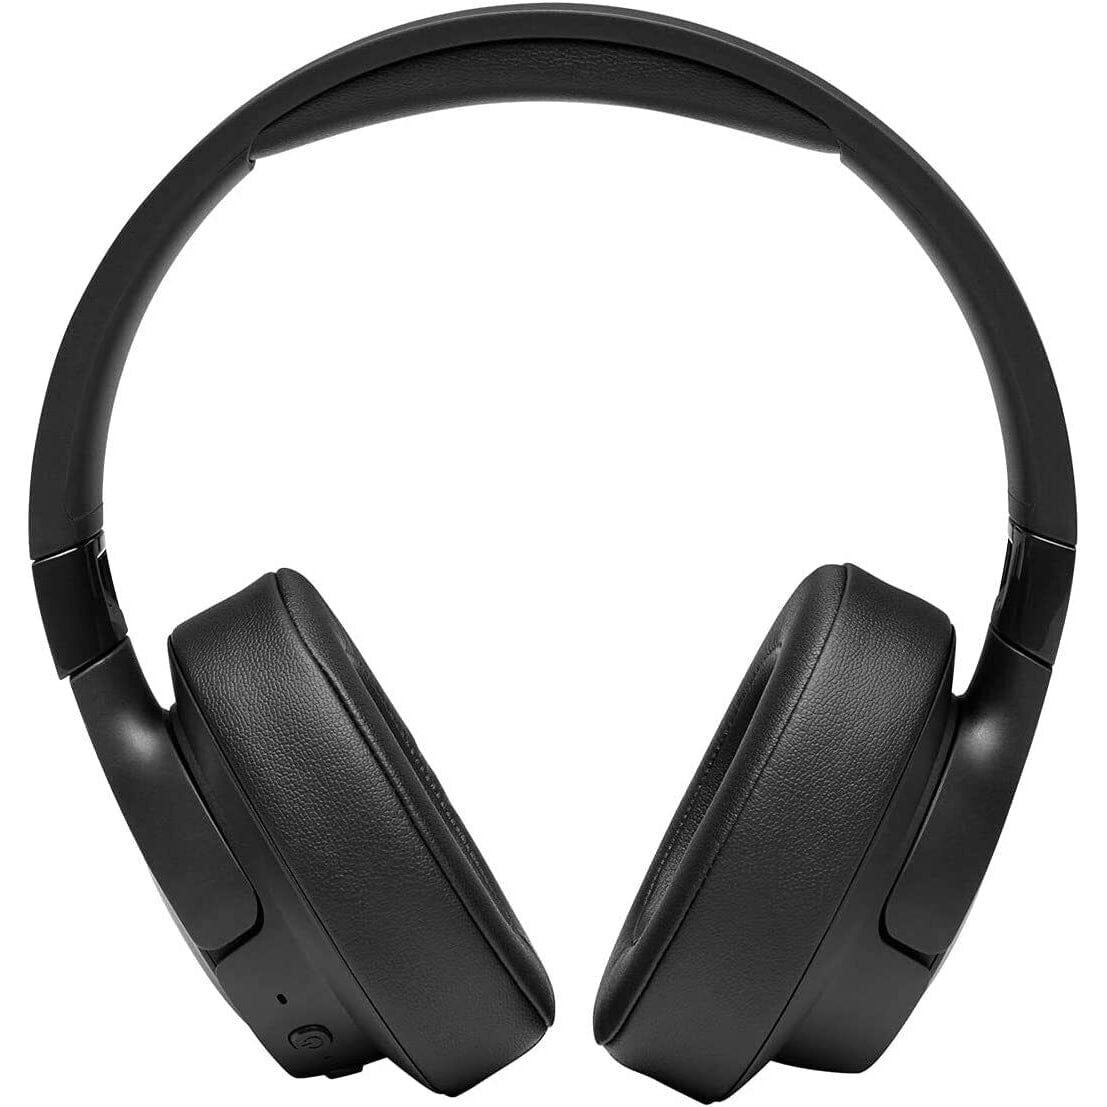 JBL Tune 760NC - Lightweight, Foldable Over-Ear Wireless Headphones with Active